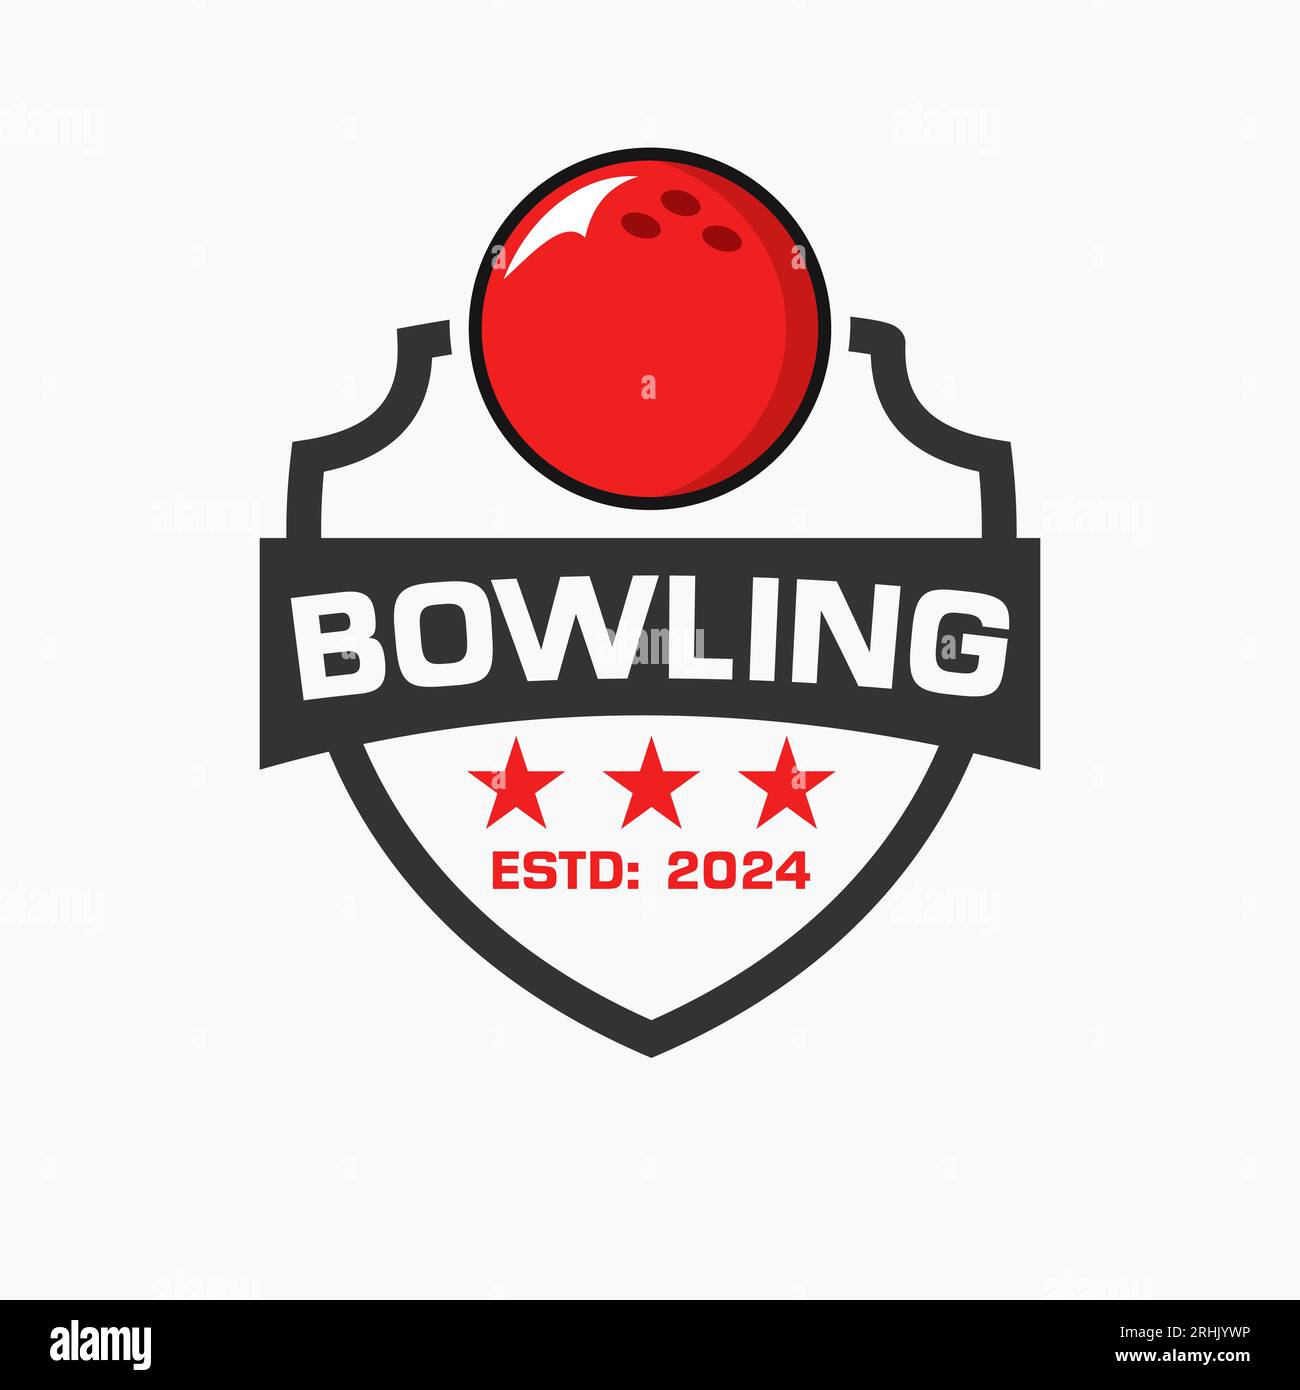 Bowling Logo Concept With Shield and Bowling Ball Symbol Stock Vector ...